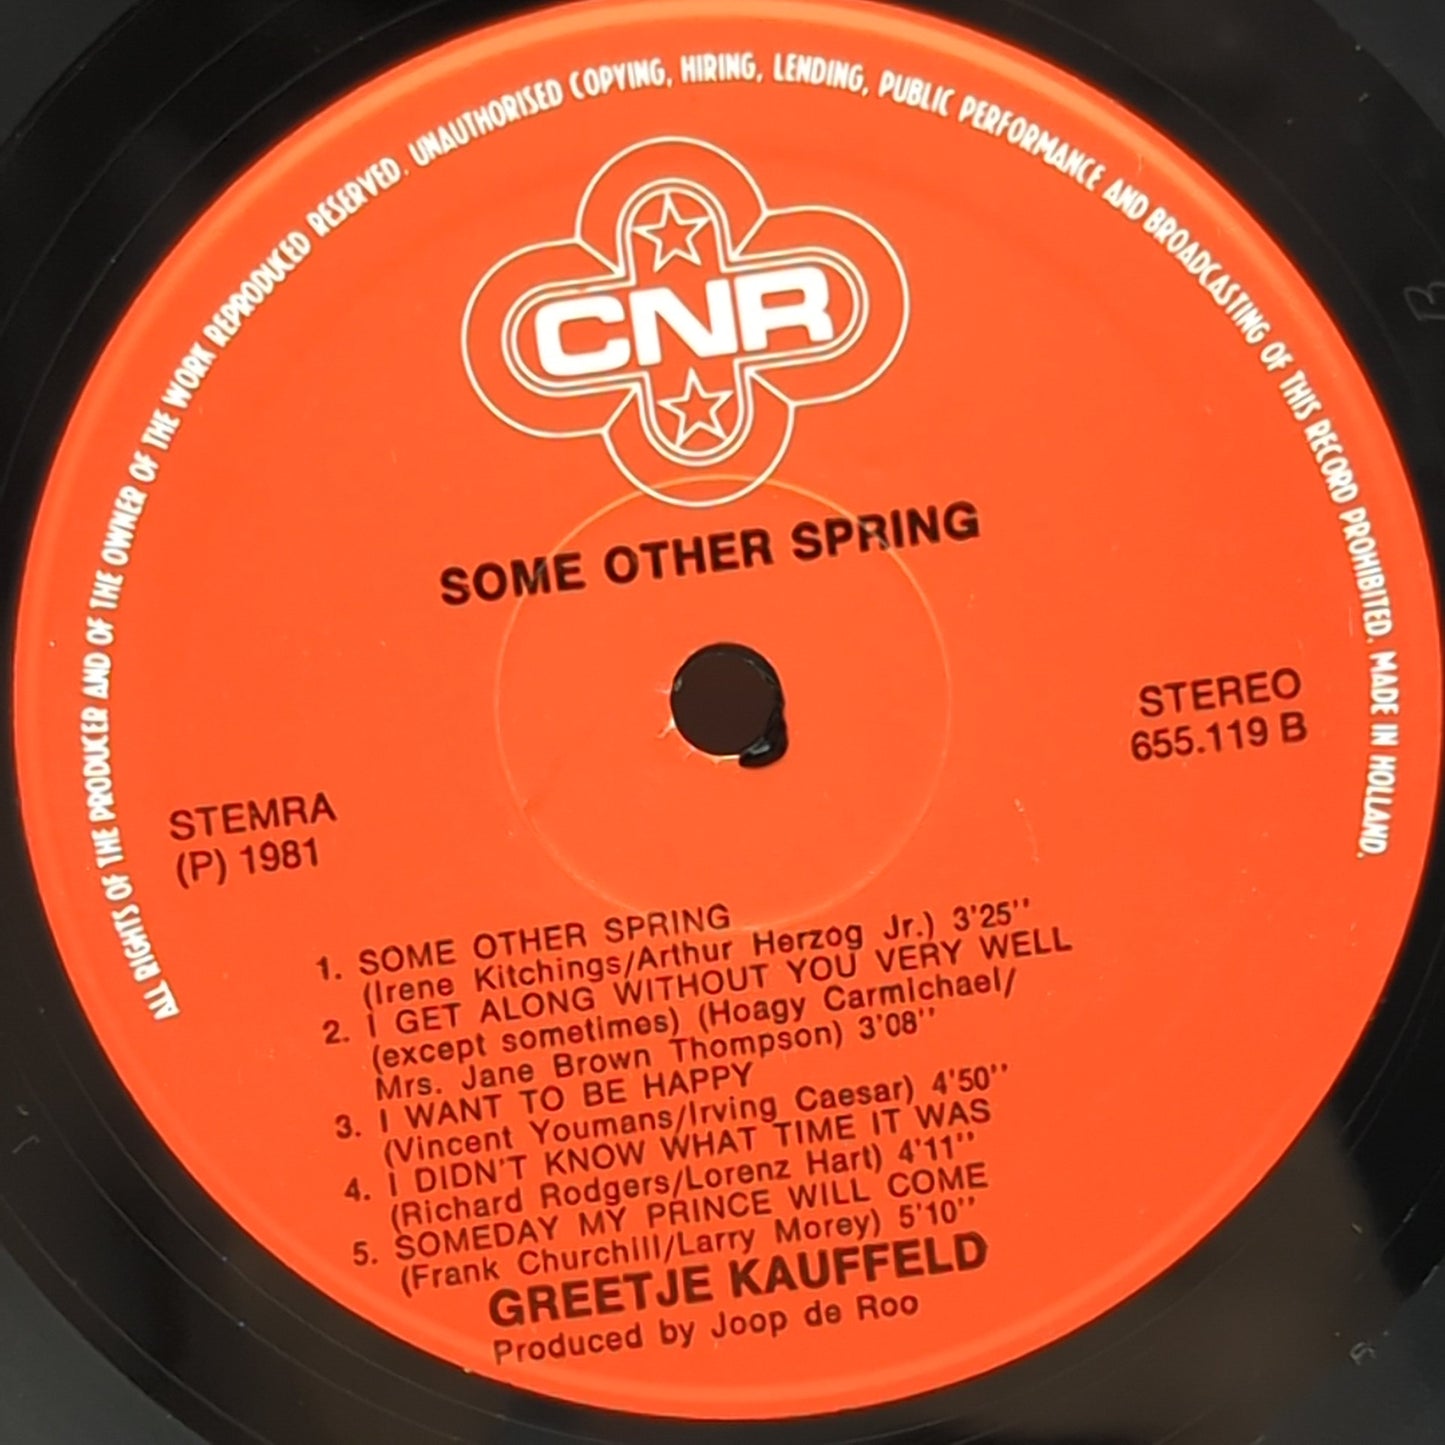 Greetje Kauffeld – Some Other Spring